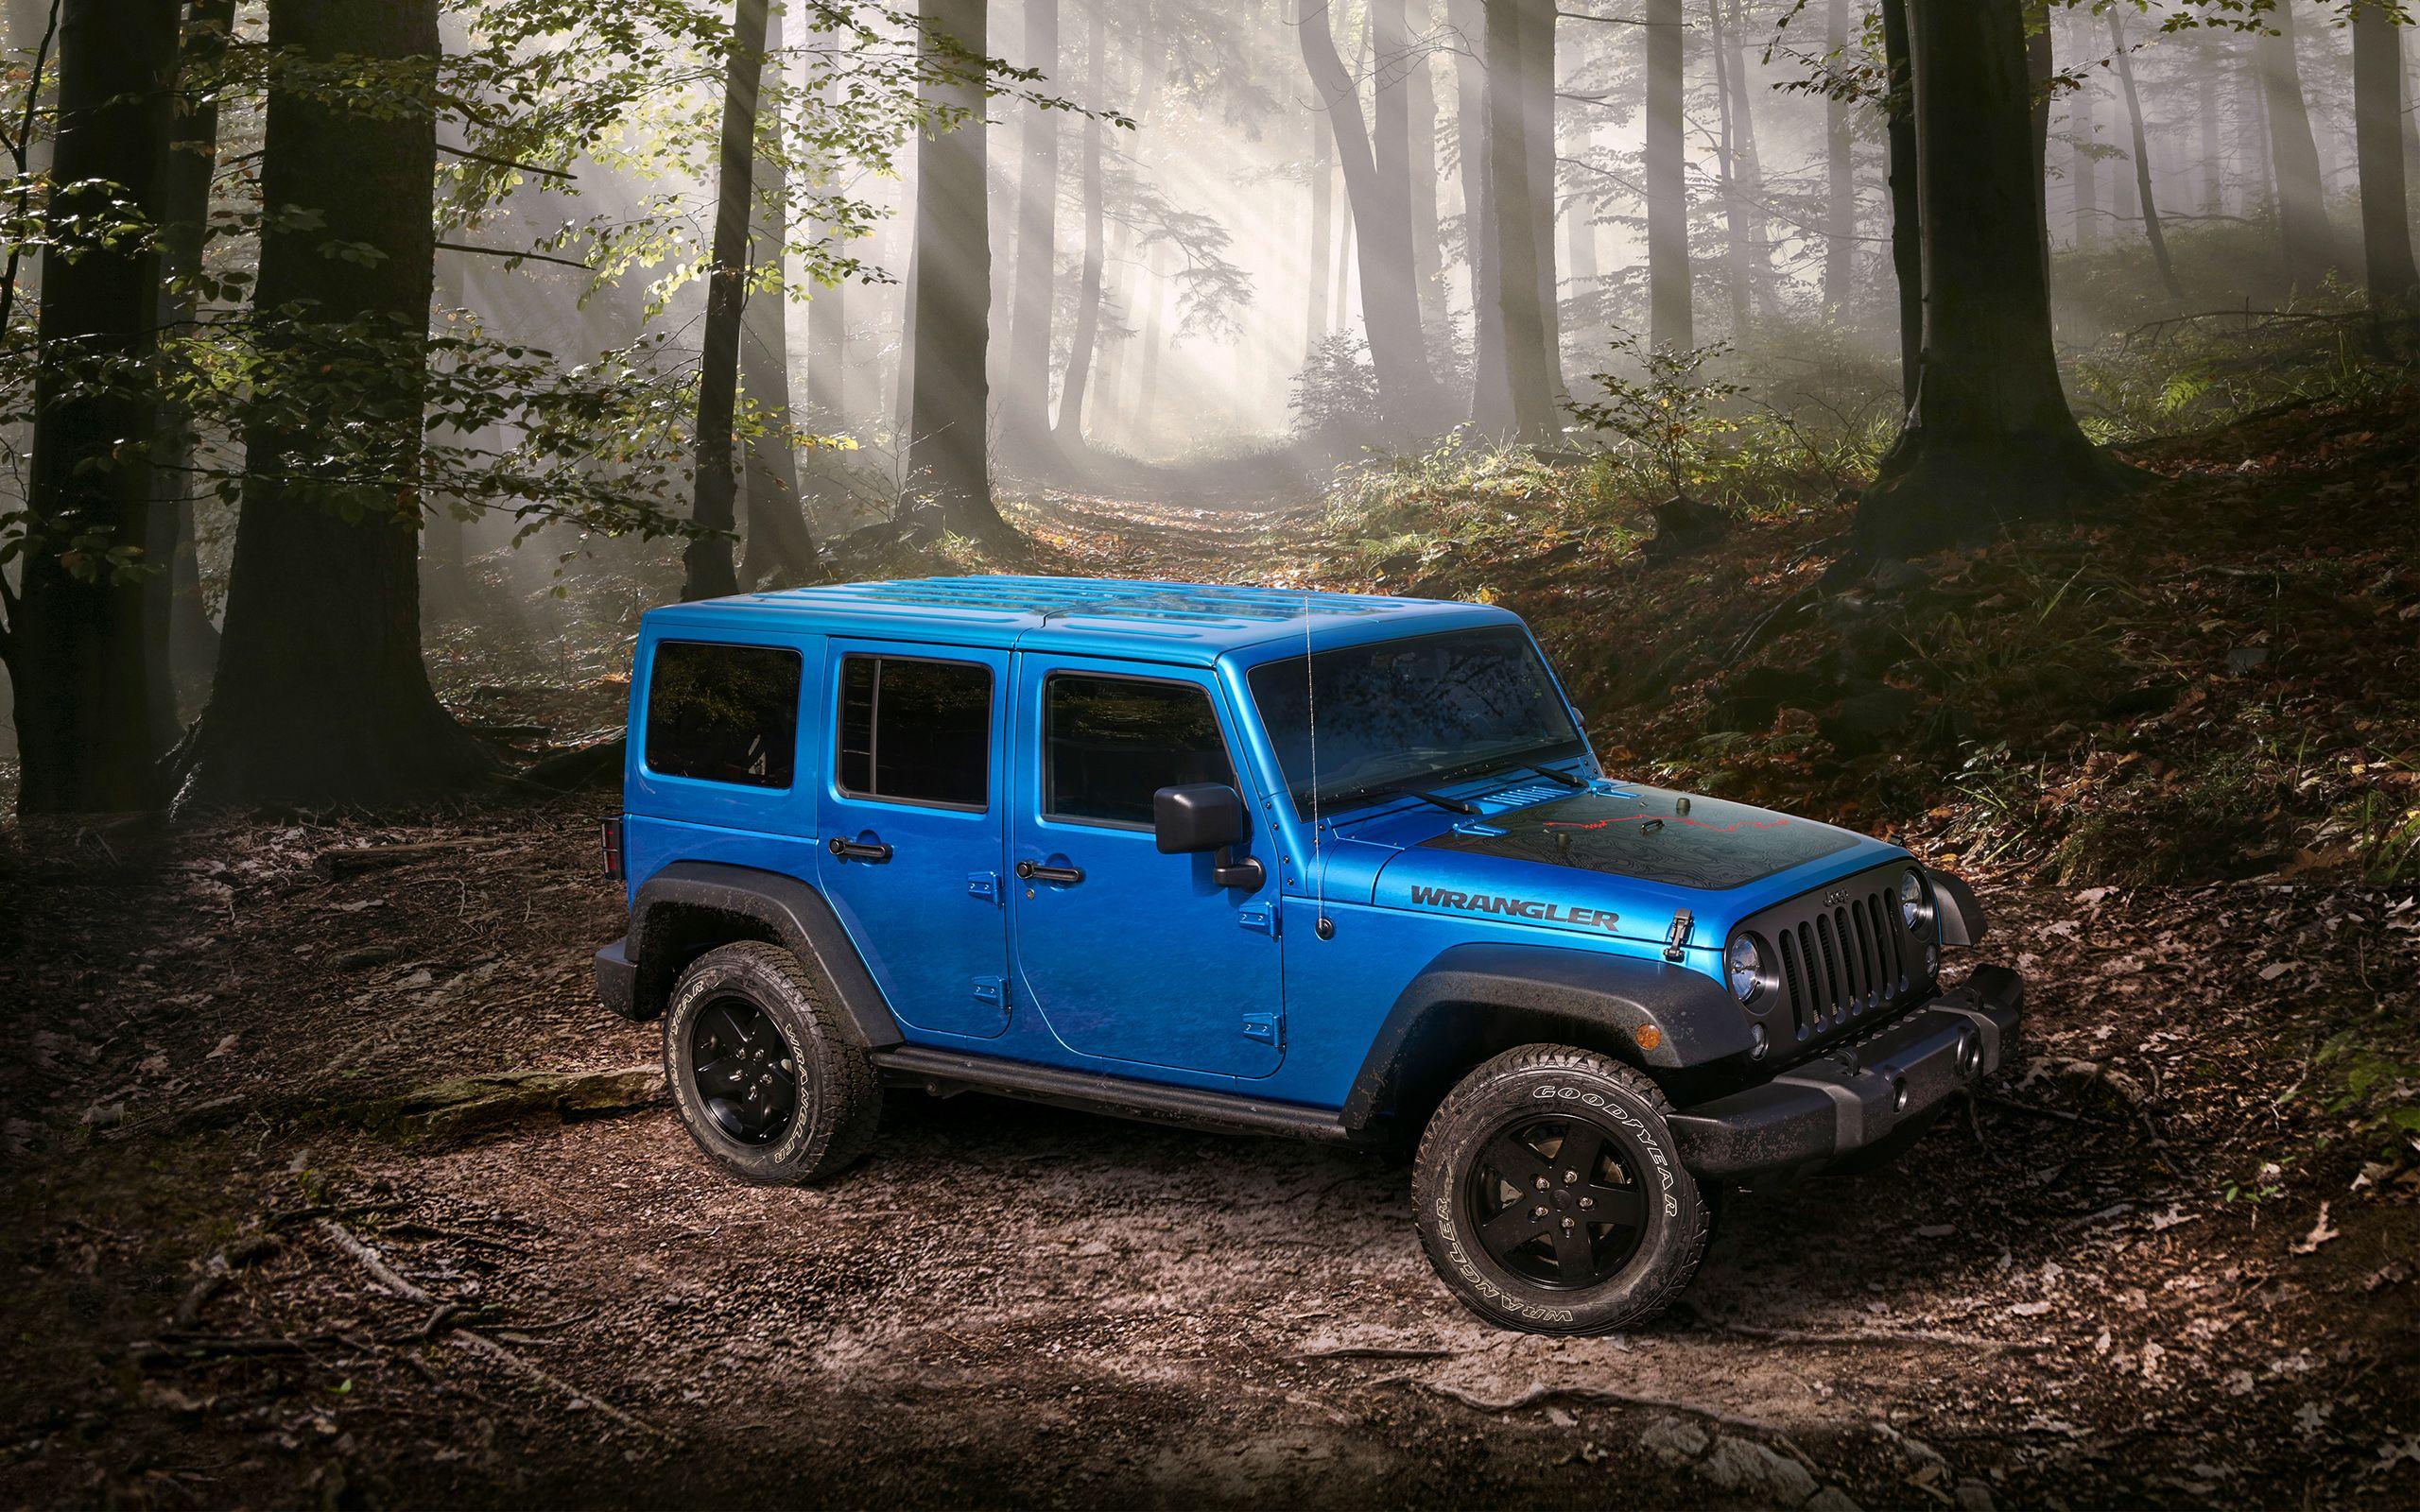 Blue Jeep Wallpapers - Top Free Blue Jeep Backgrounds - WallpaperAccess